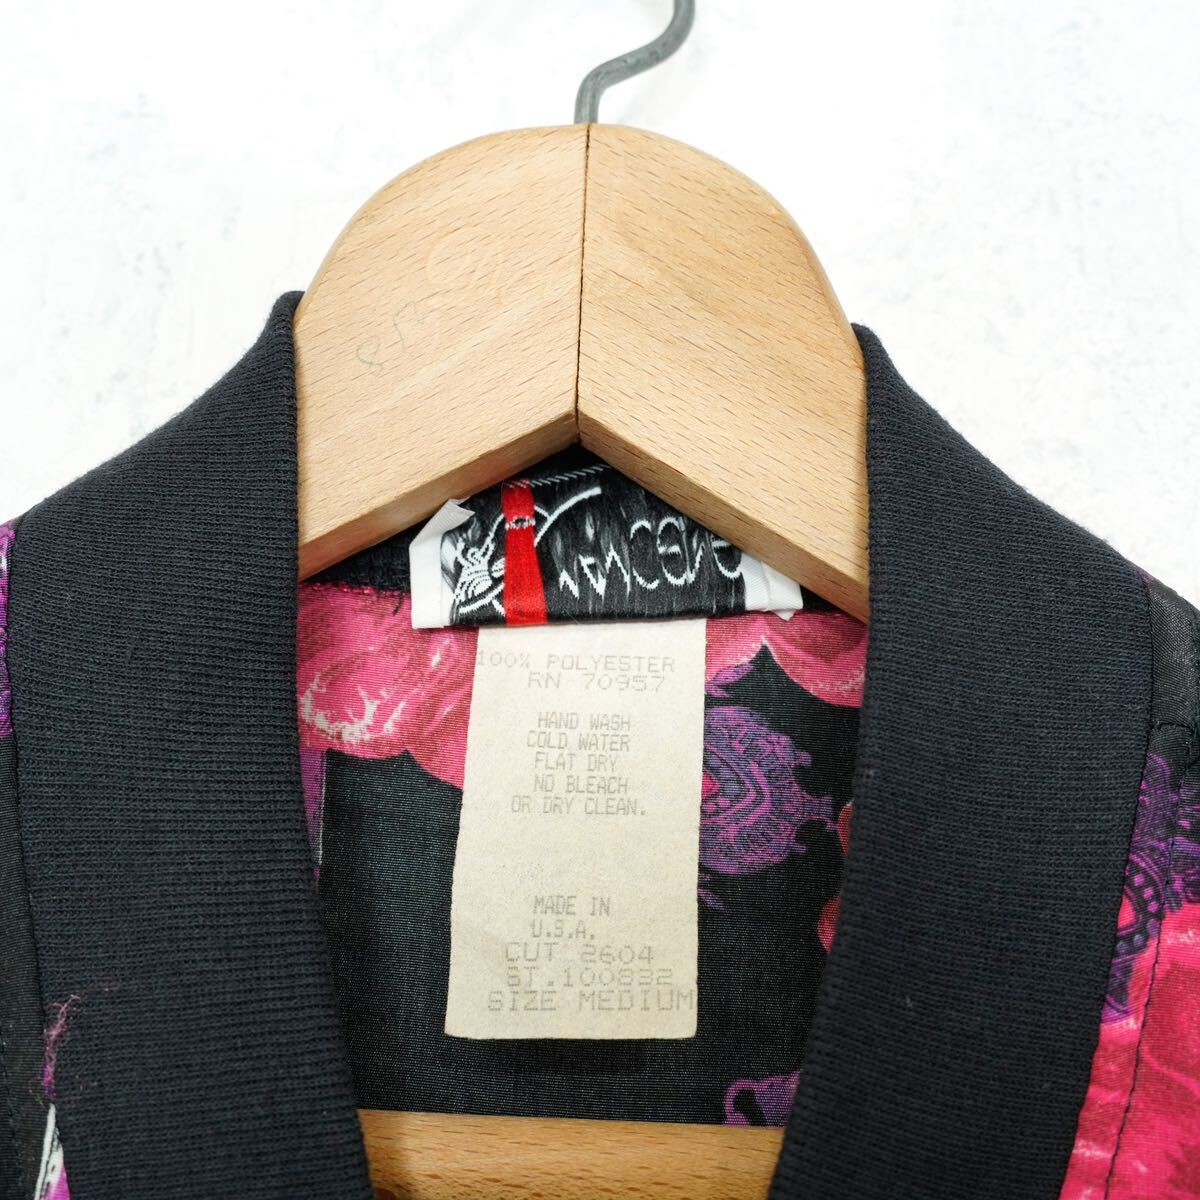 USA VINTAGE MAYCENE FLOWER PATTERNED DESIGN ZIP UP BLOUSON/アメリカ古着花柄デザインジップアップブルゾン_画像10